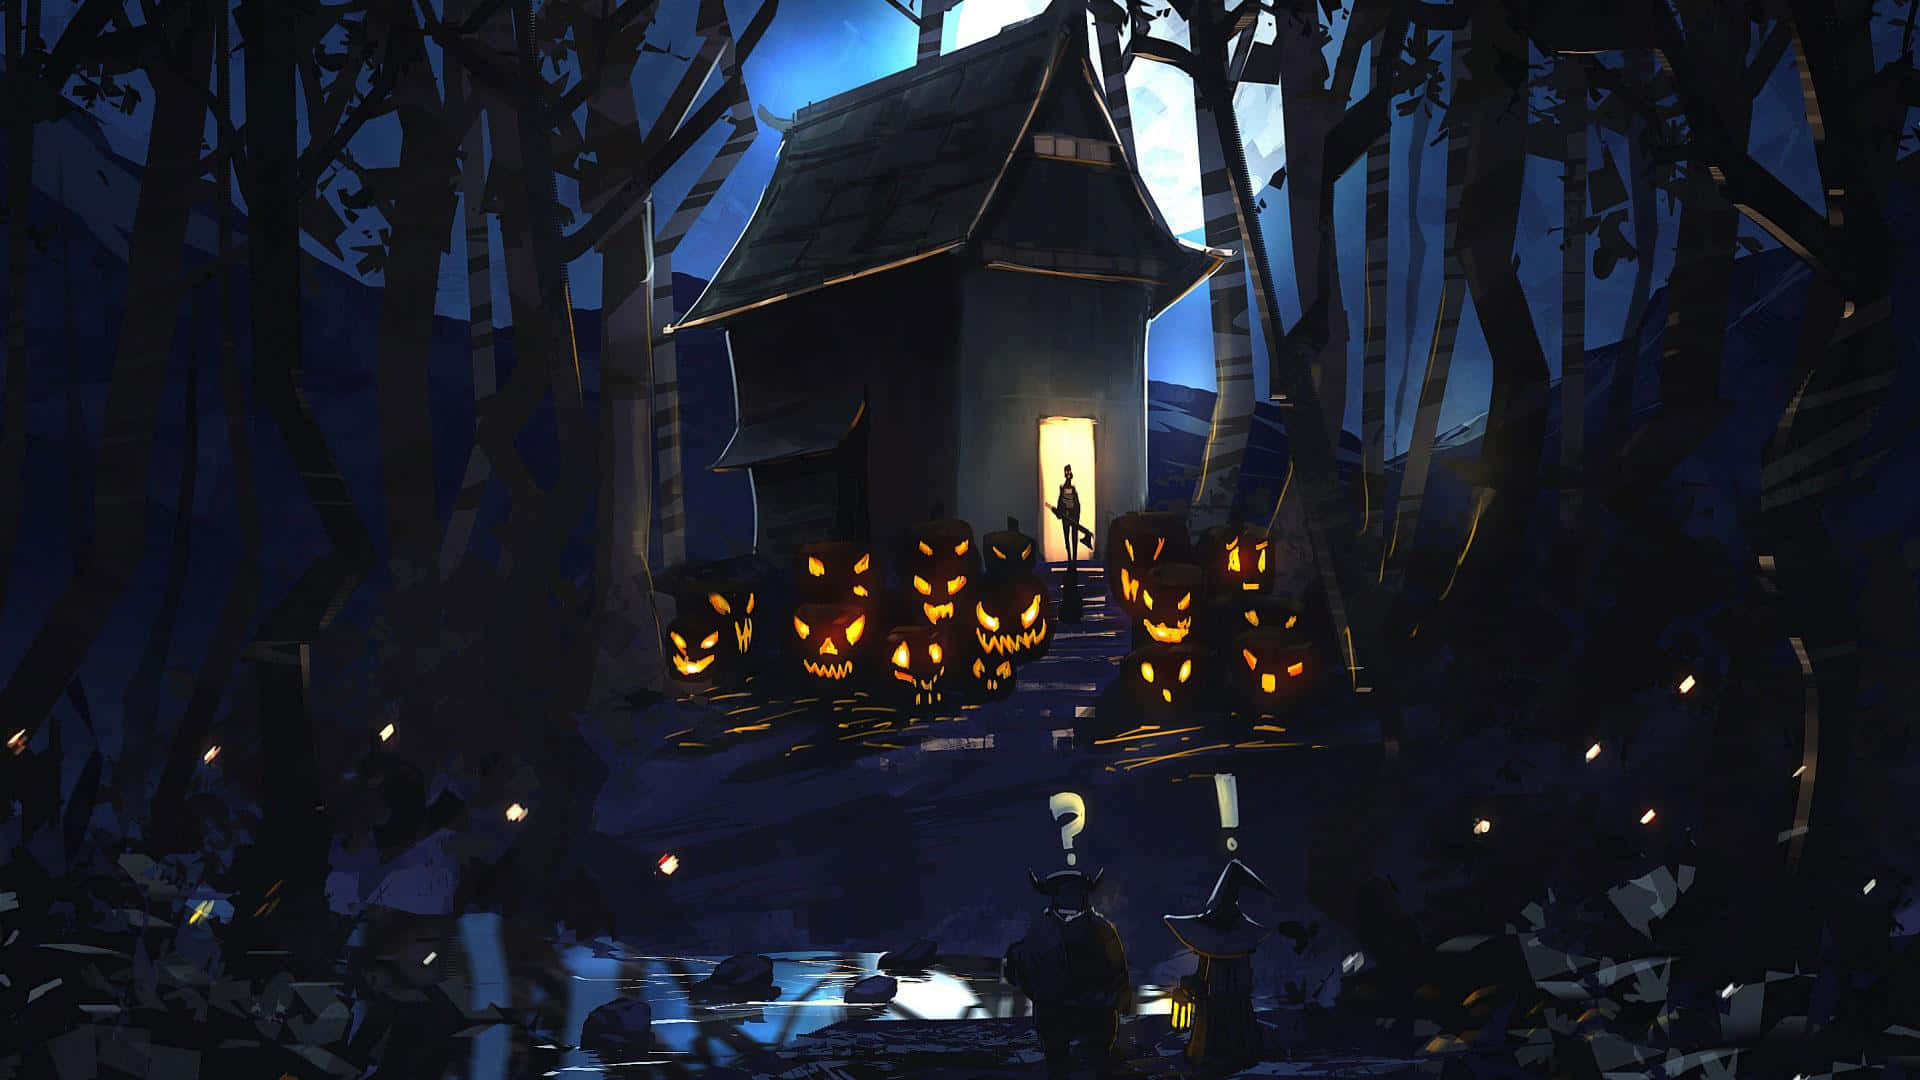 Can you feel the spookiness of Halloween?